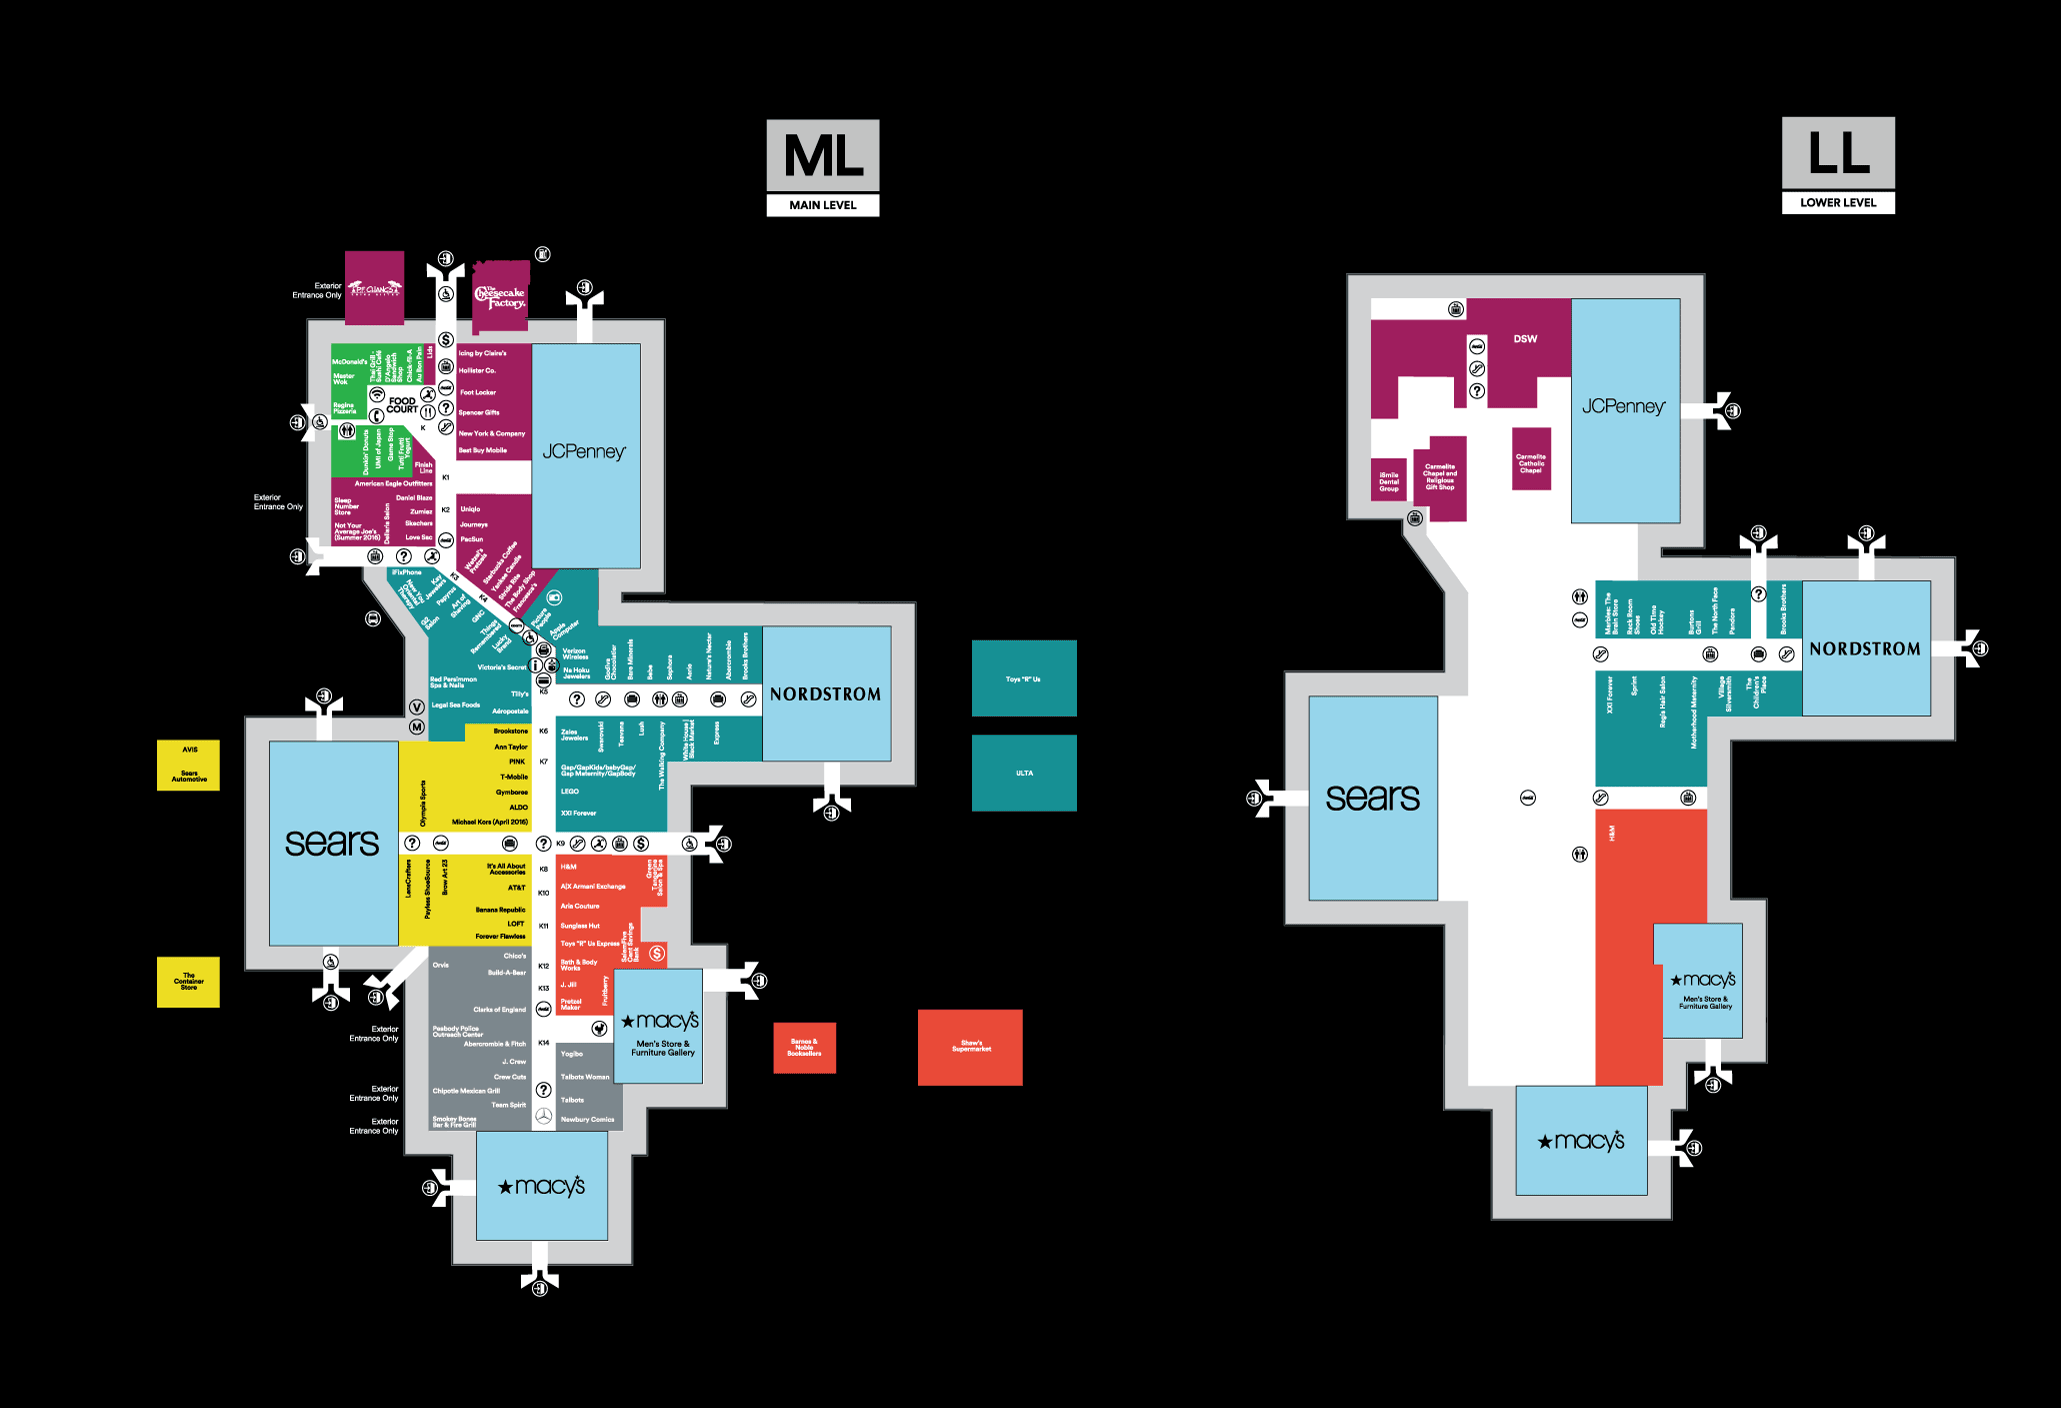 H&M store placement map - NorthPark Mall